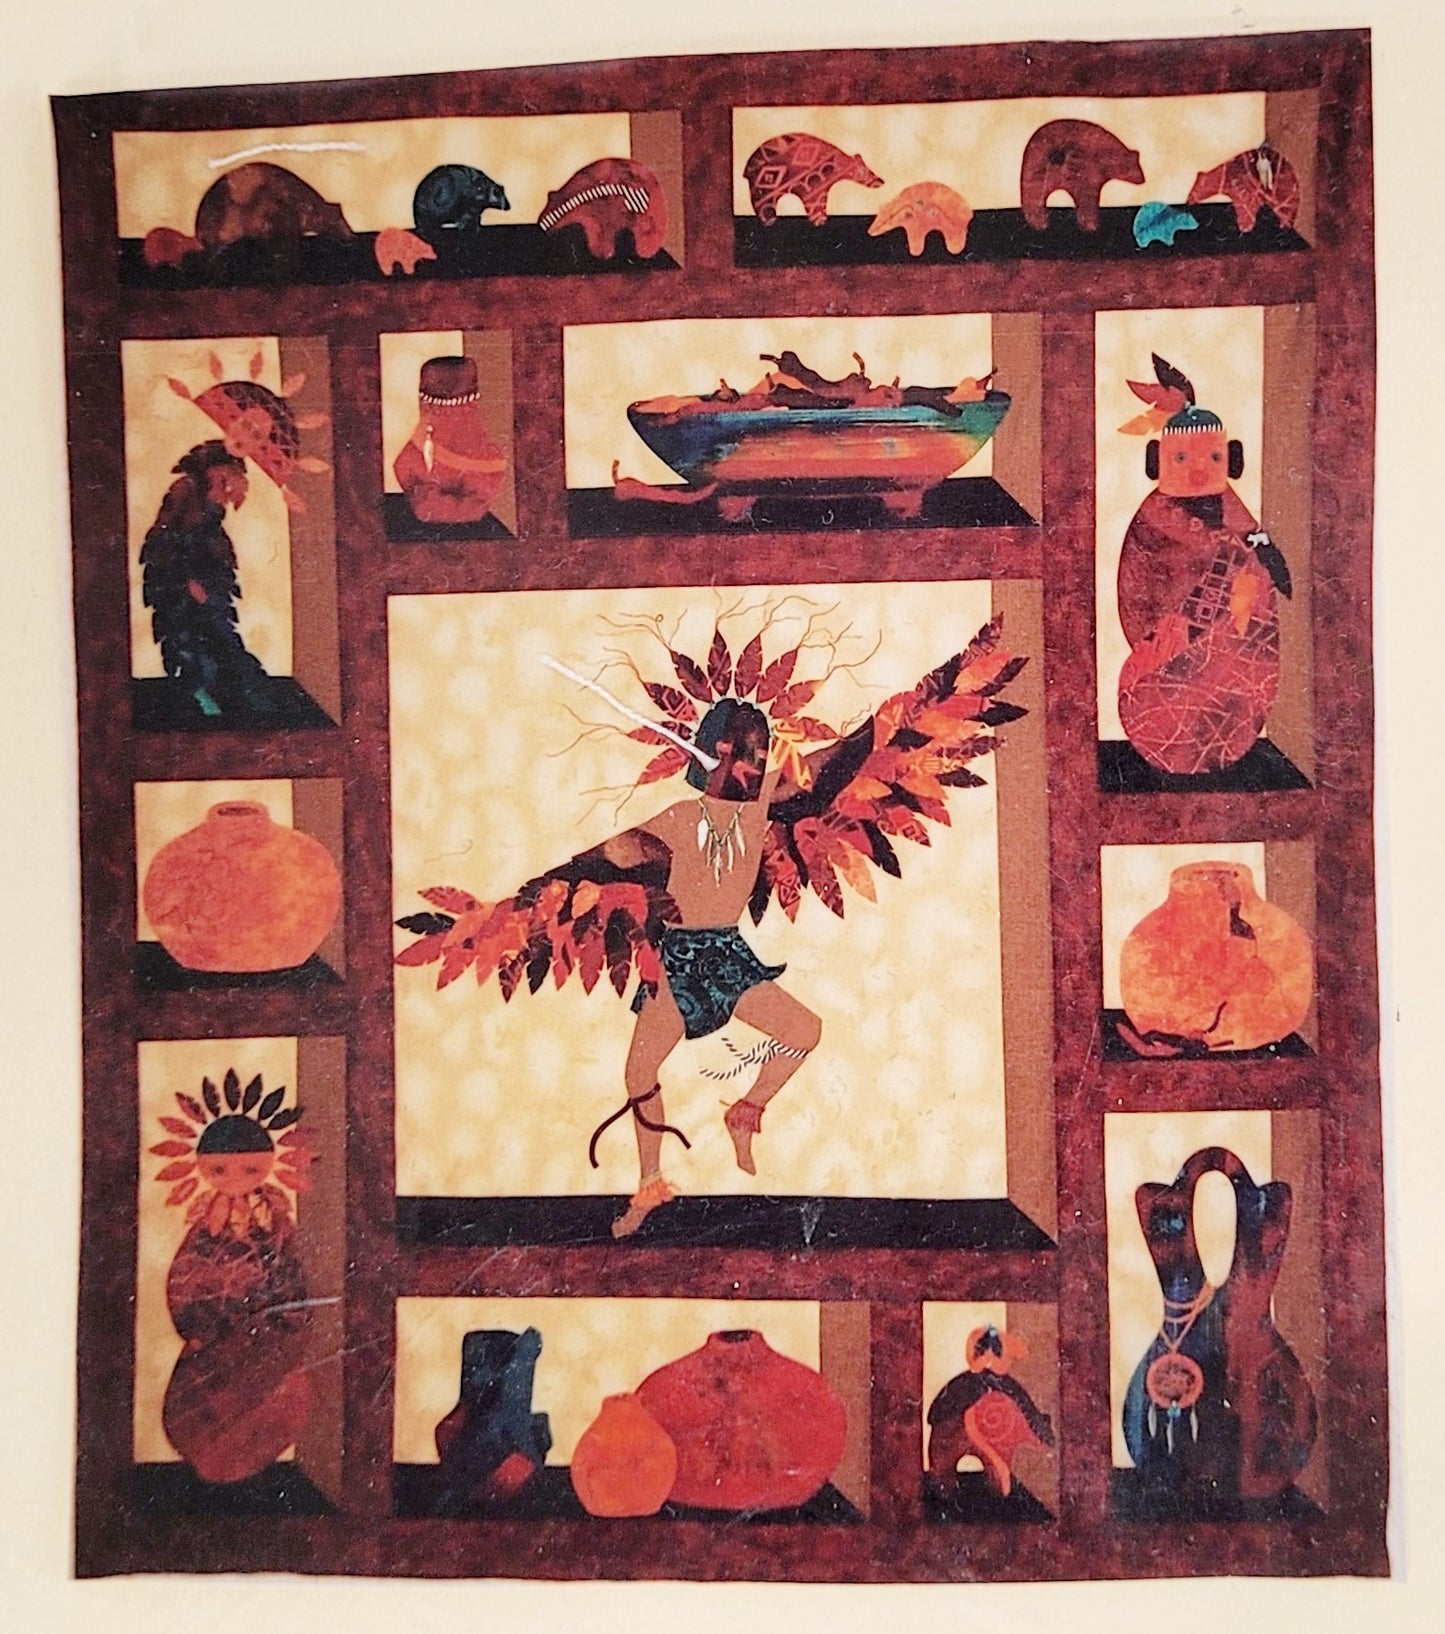 NEW *Eagle Dancer Shadow Box Quilt Pattern: Chili Pot Block #5 & Material